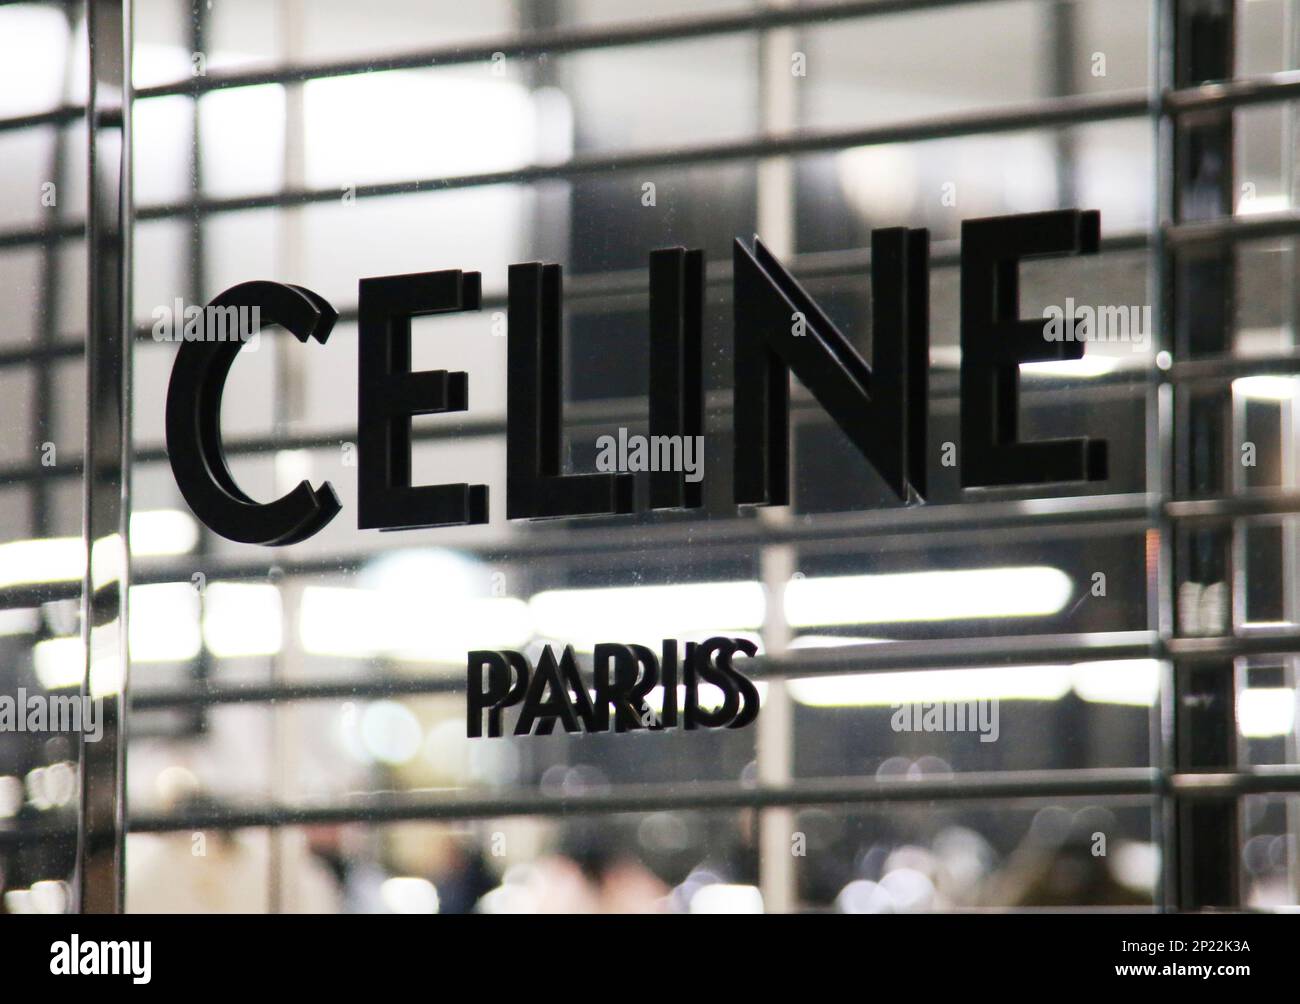 The logo of Celine (Céline) is seen at Omotesando in Minato Ward, Tokyo on  May 30, 2022. Celine (Céline) is a French luxury ready-to-wear and leather goods  brand owned by the LVMH (